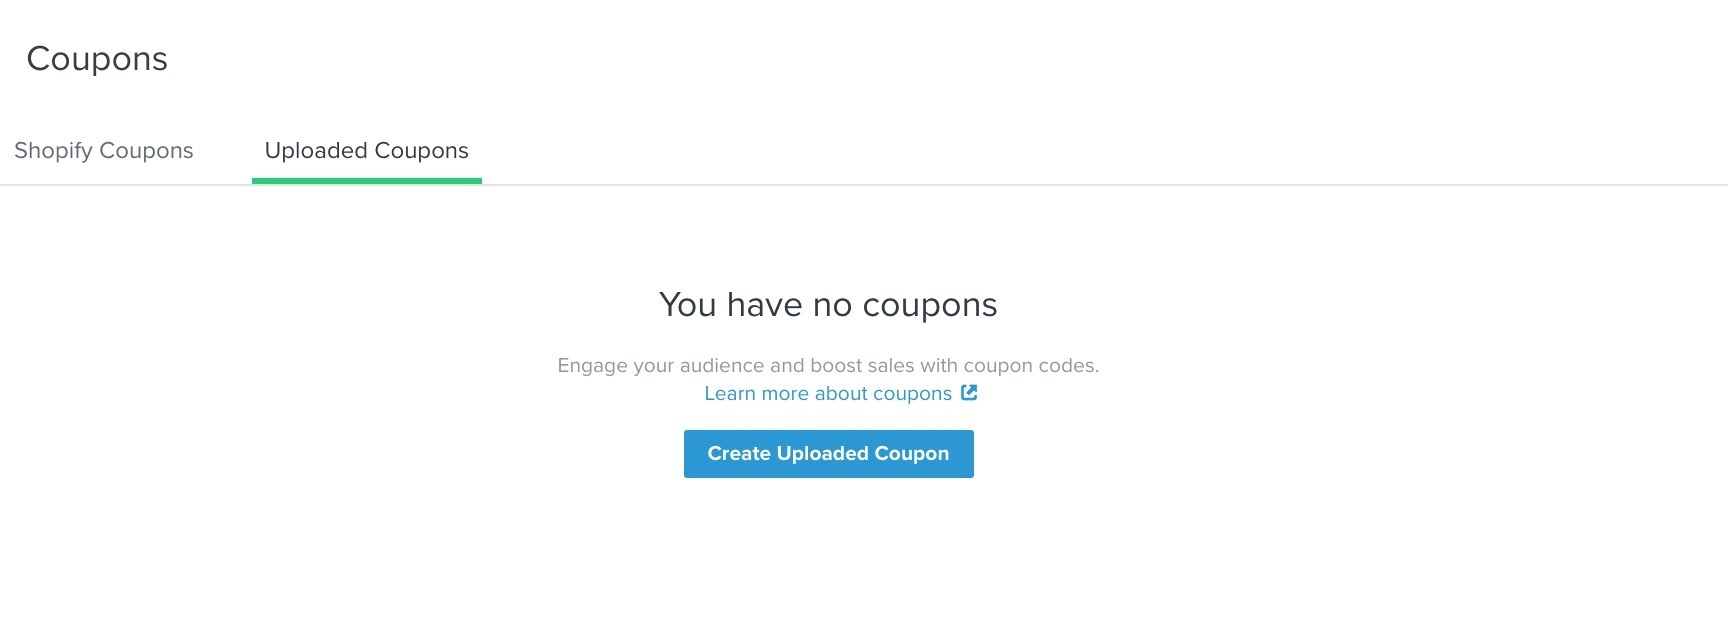 The uploaded coupons tab in Klaviyo showing 0coupons